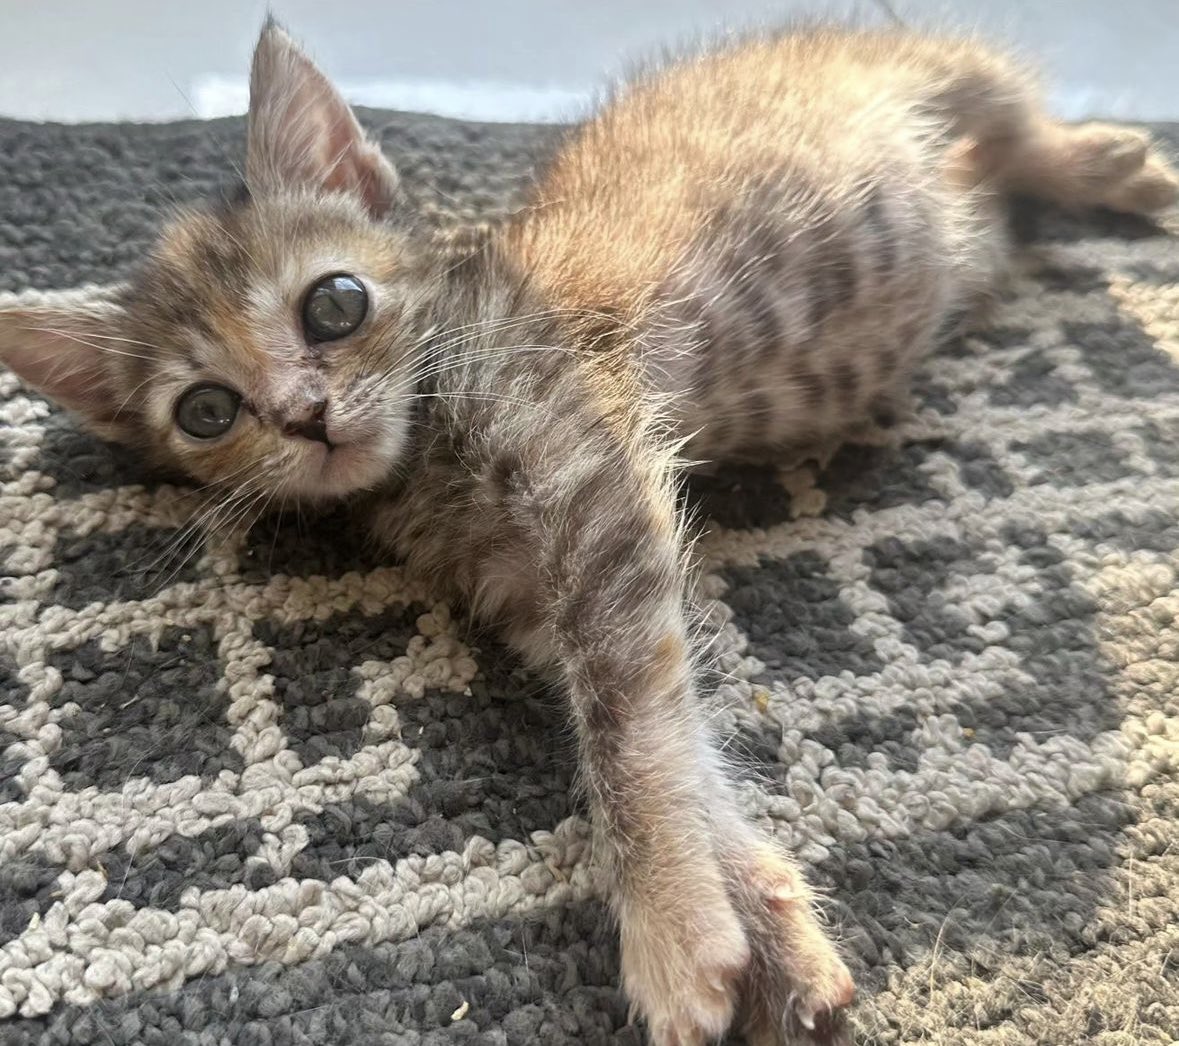 Posey is our 8 week old female kitty! 💗🐾 DM us to adopt any of our available pets! 🫶🏽 #AnimalLoversResce #rescuestory #animalrescue #adoptdontshop #rescue #animals #animallovers #animalsanctuary #animalrights #dogs #cats #rescuecat #rescuecats #rescuedog #kittenrescue #adoptme